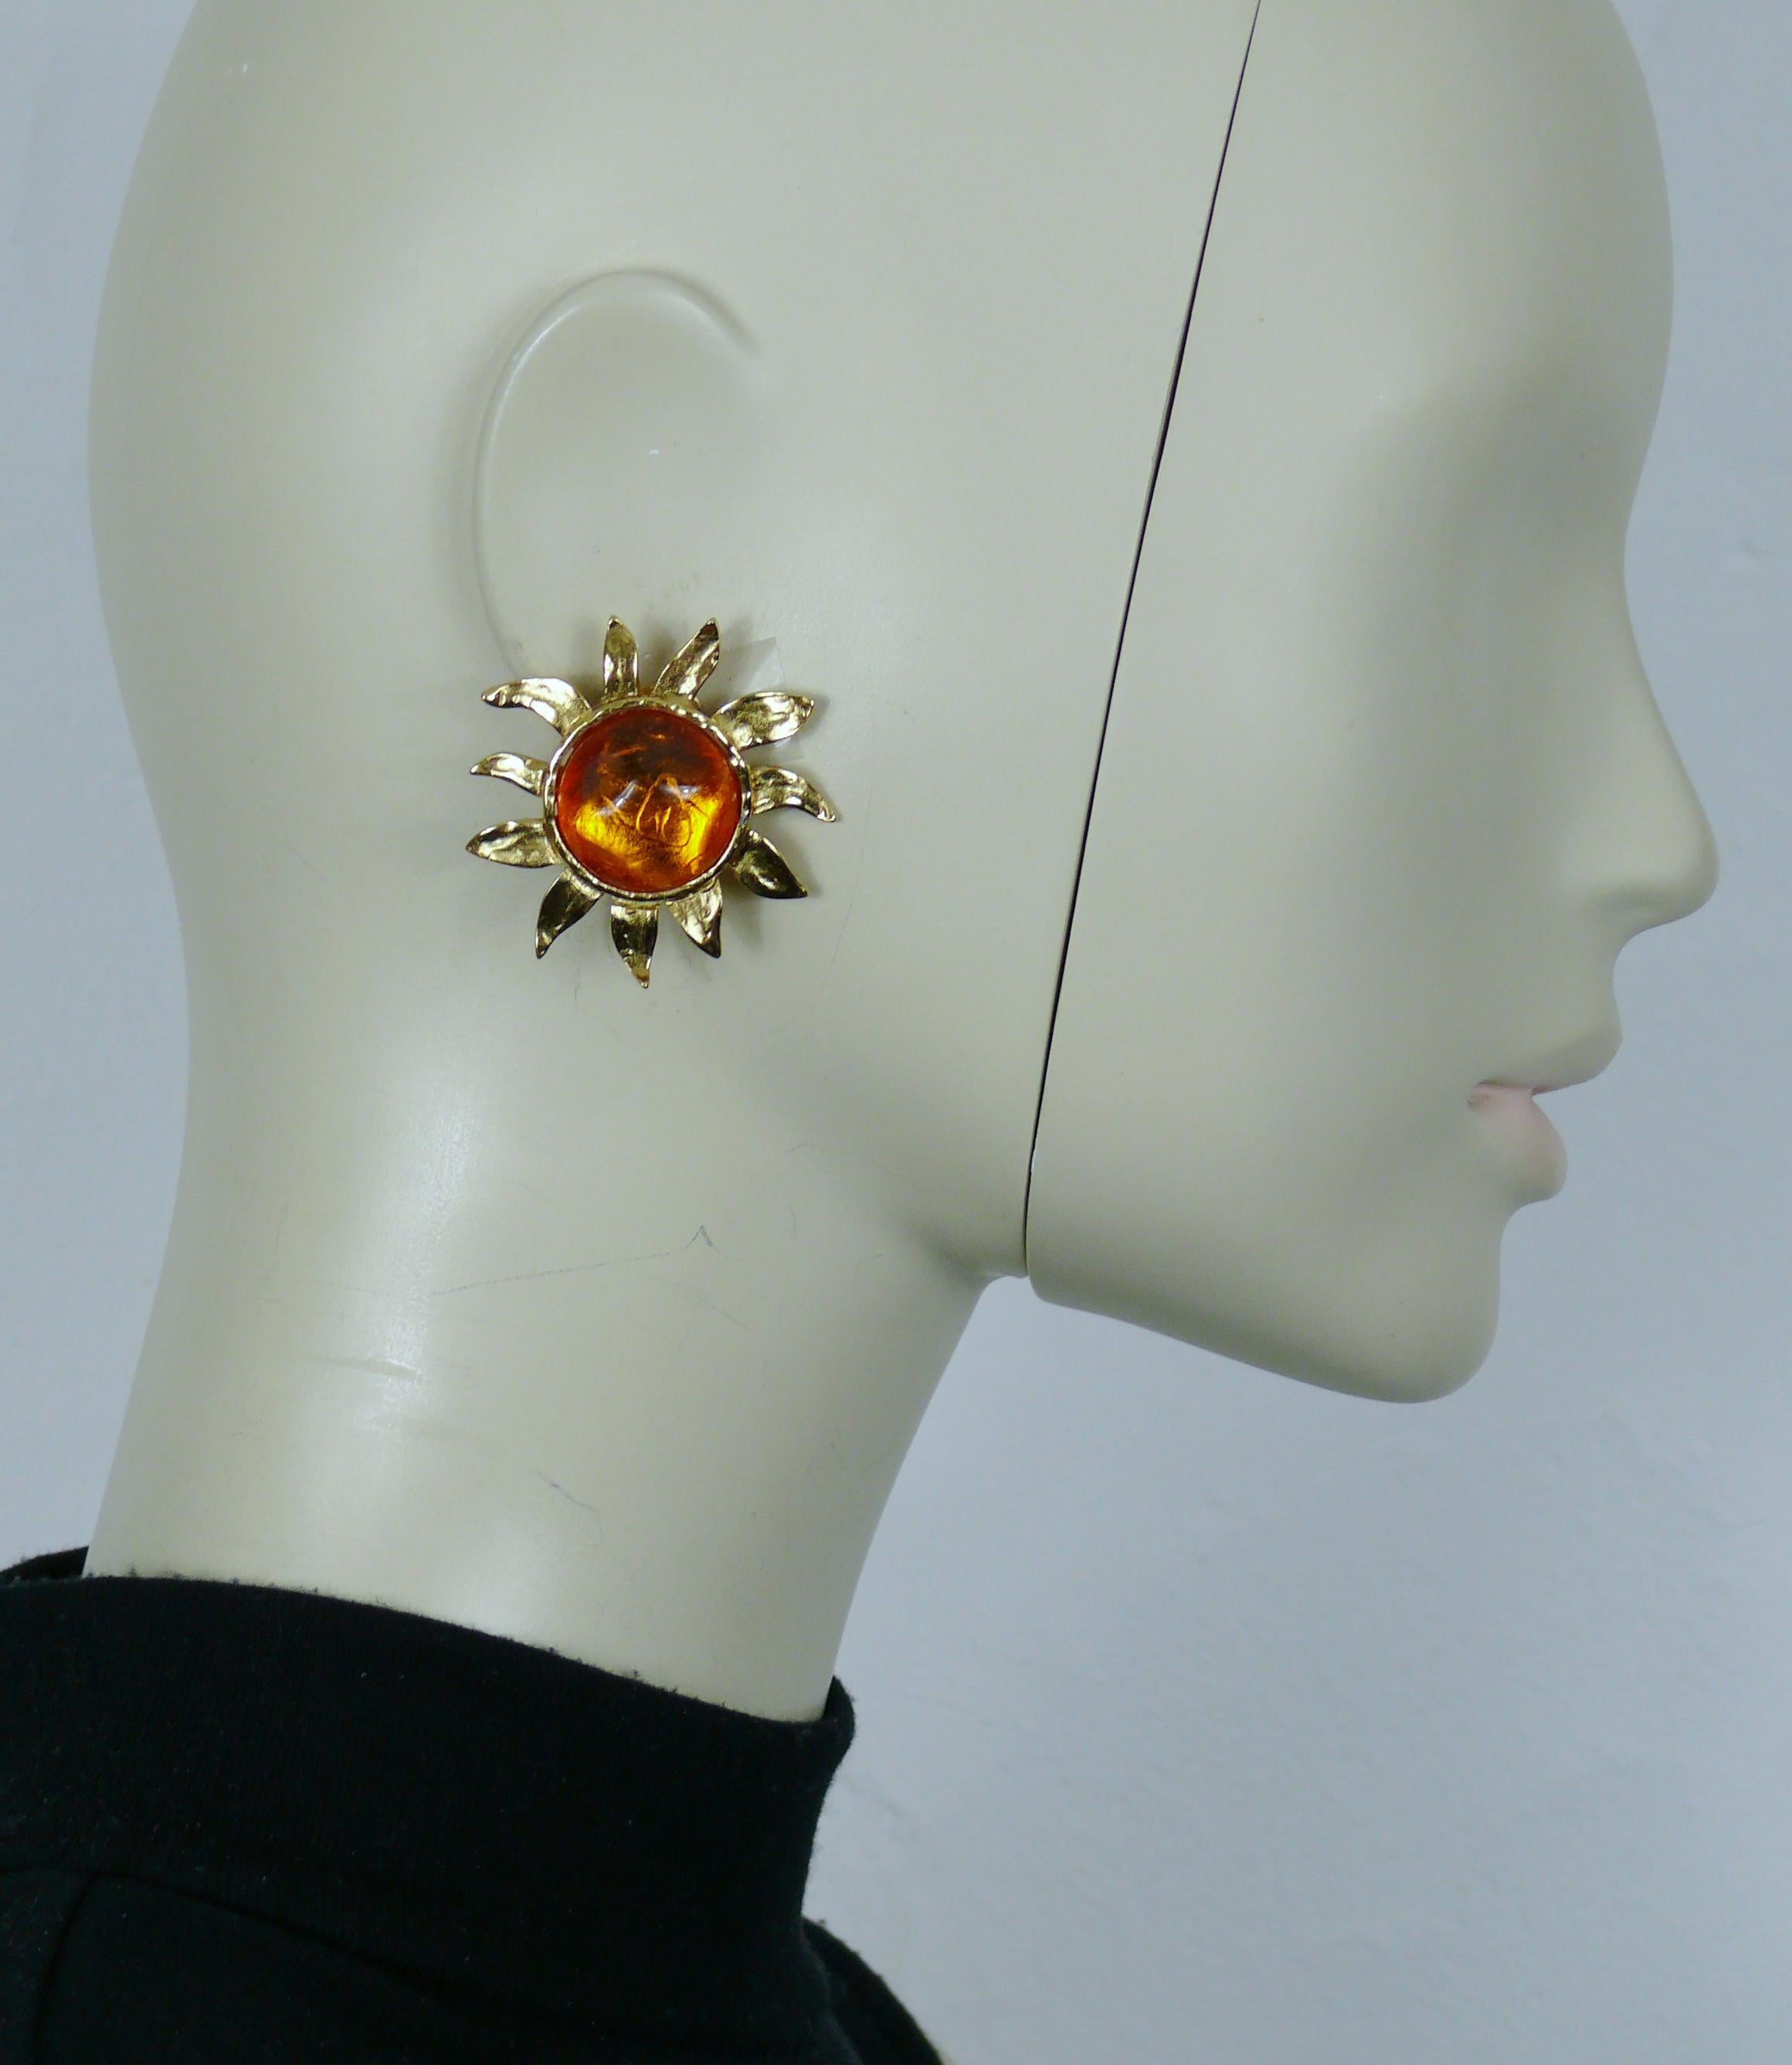 YVES SAINT LAURENT vintage textured sun clip-on earrings featuring an irregular shaped orange resin cabochon at the center.

Embossed YSL.

Indicative measurements : max. height approx. 4.3 cm (1.69 inches) / max. width approx. 4.1 cm (1.61